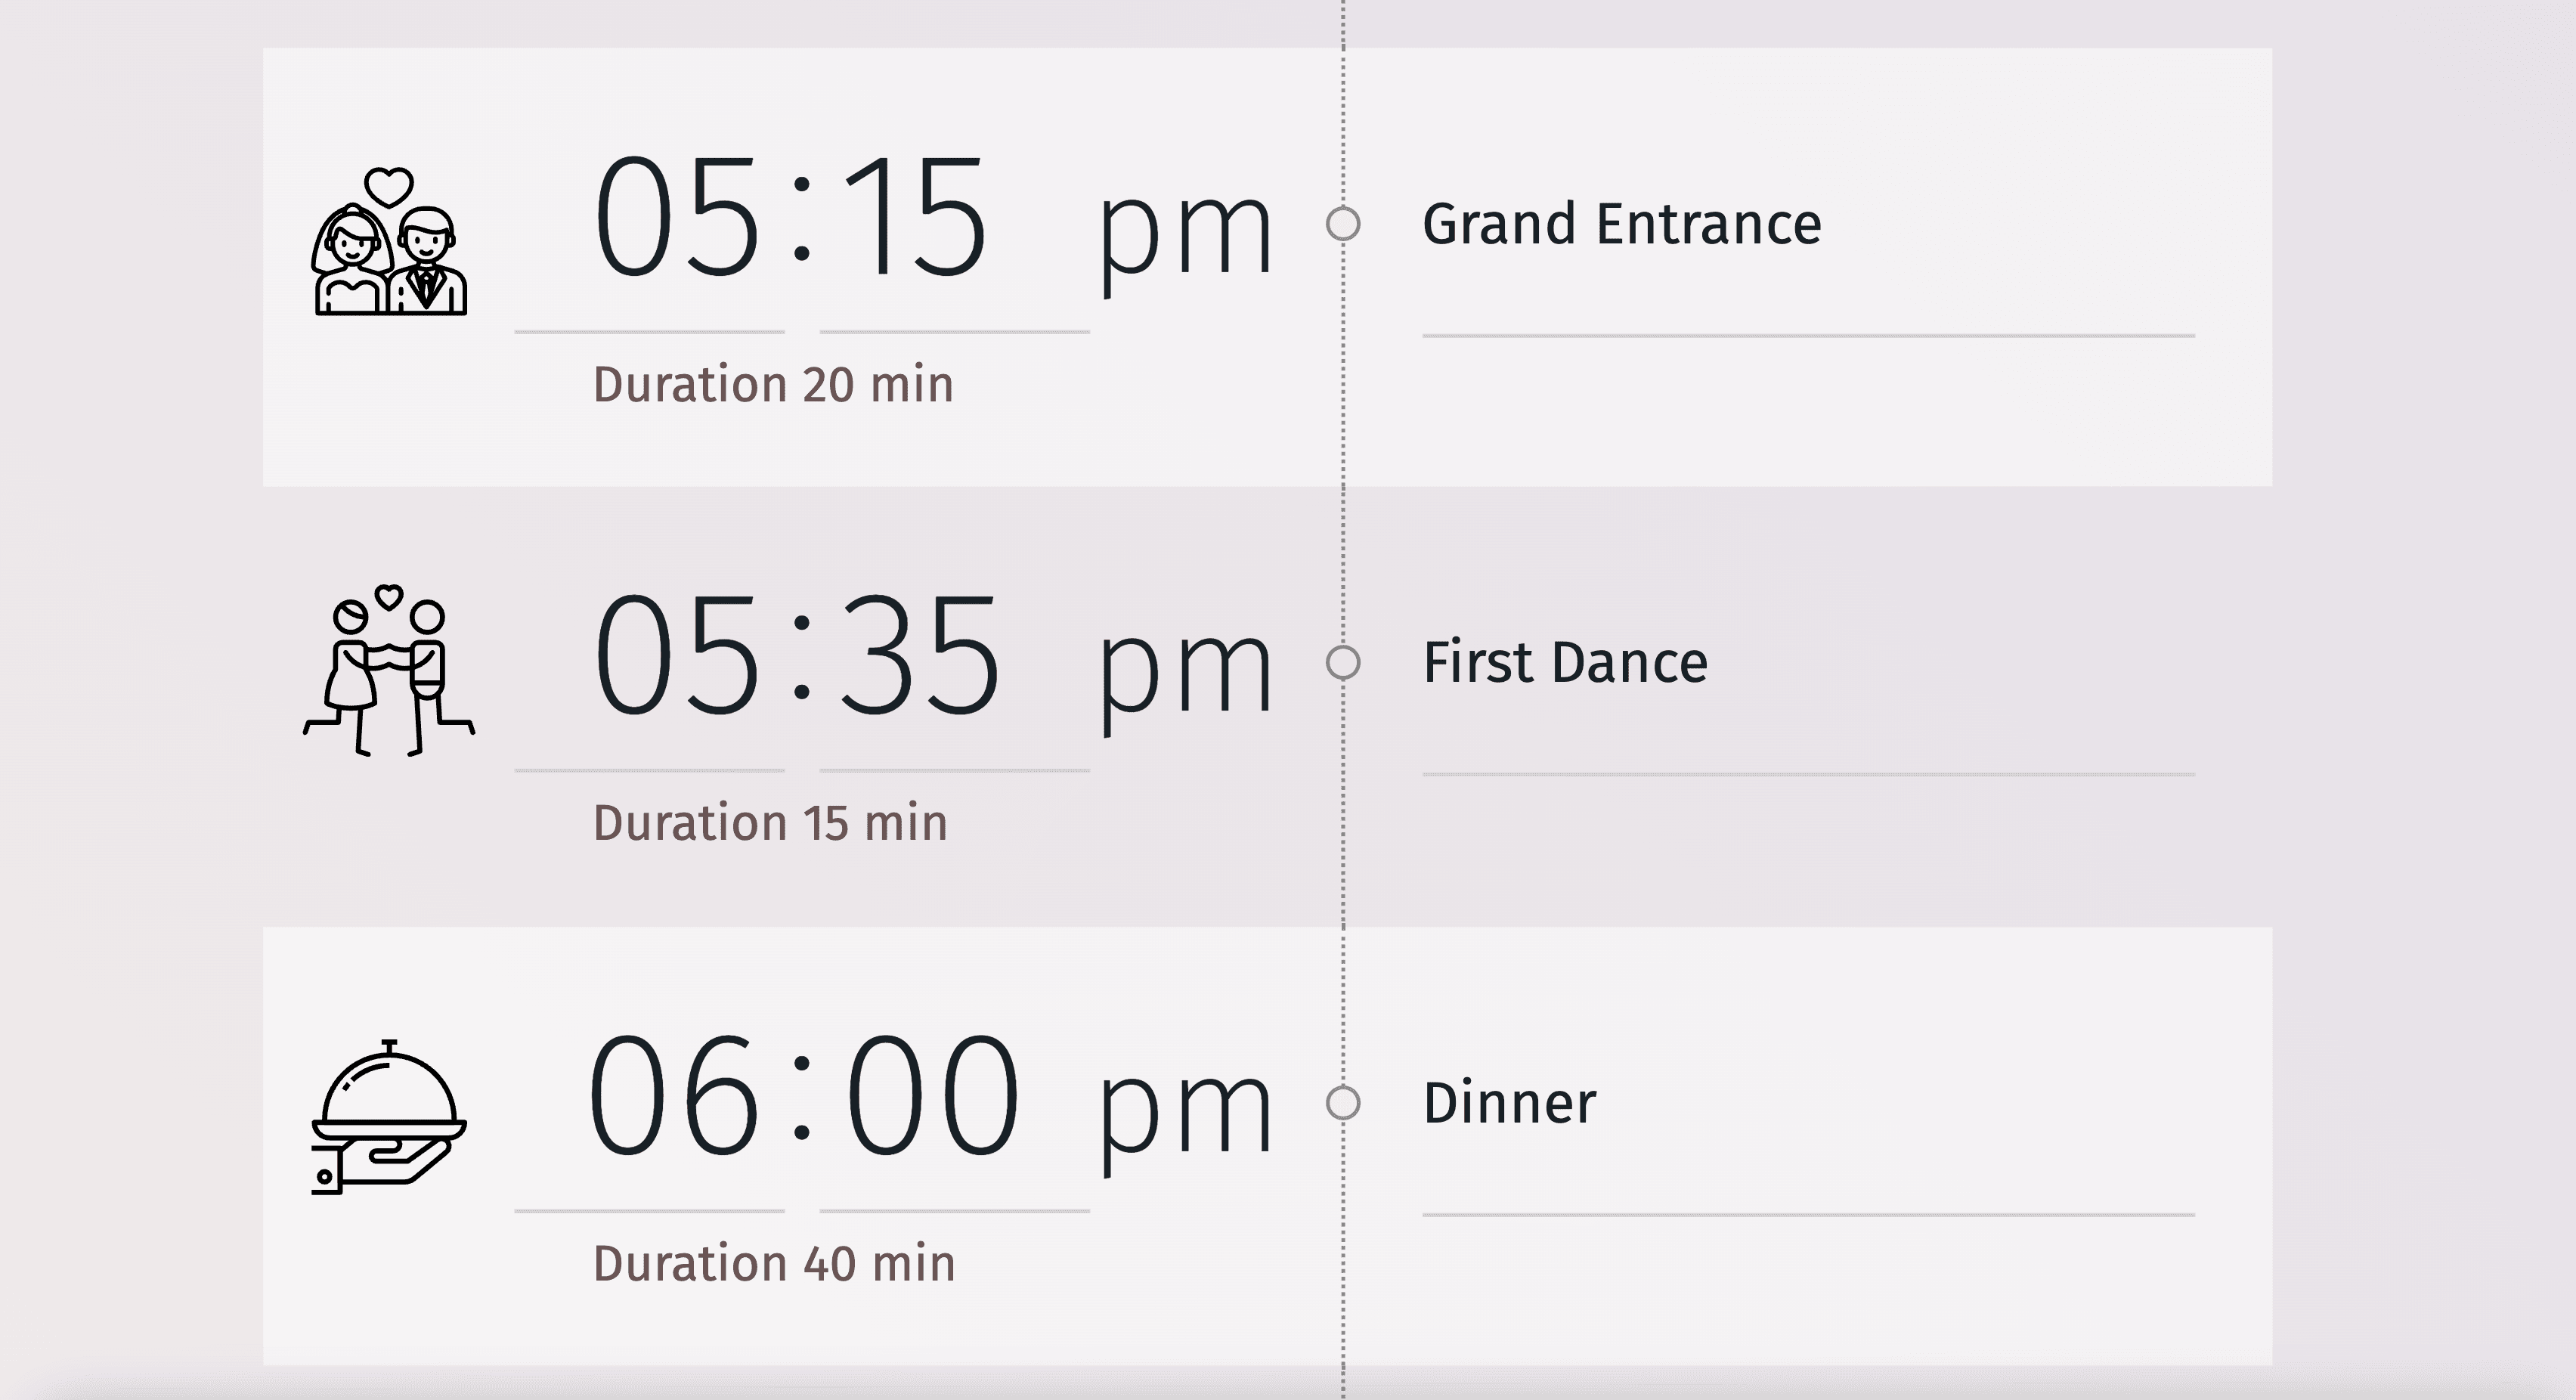 Visual representation of a wedding reception timeline, from cocktail hour to final dance.